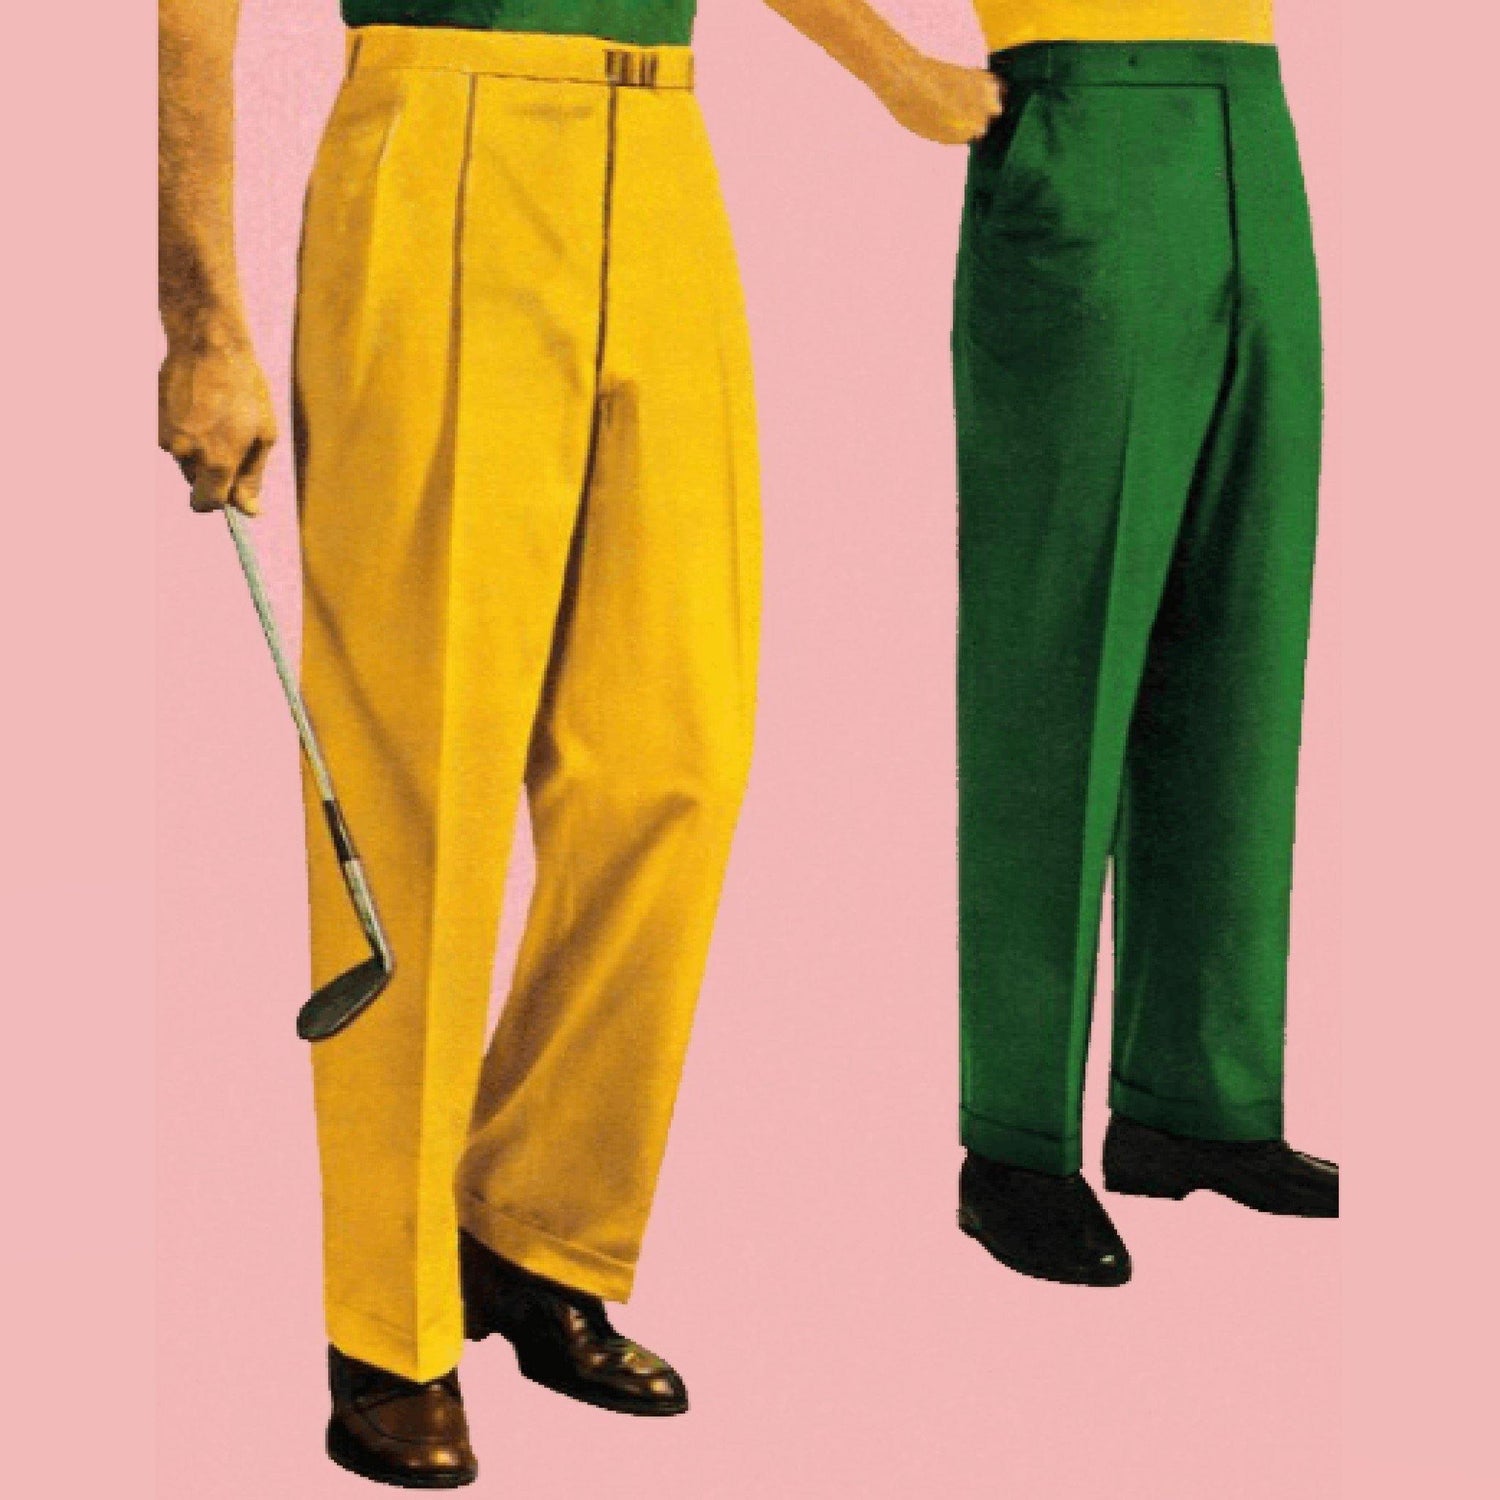 1950s Pattern, Men's Tailored Fred Astaire Slacks - Vintage Sewing Pattern Company